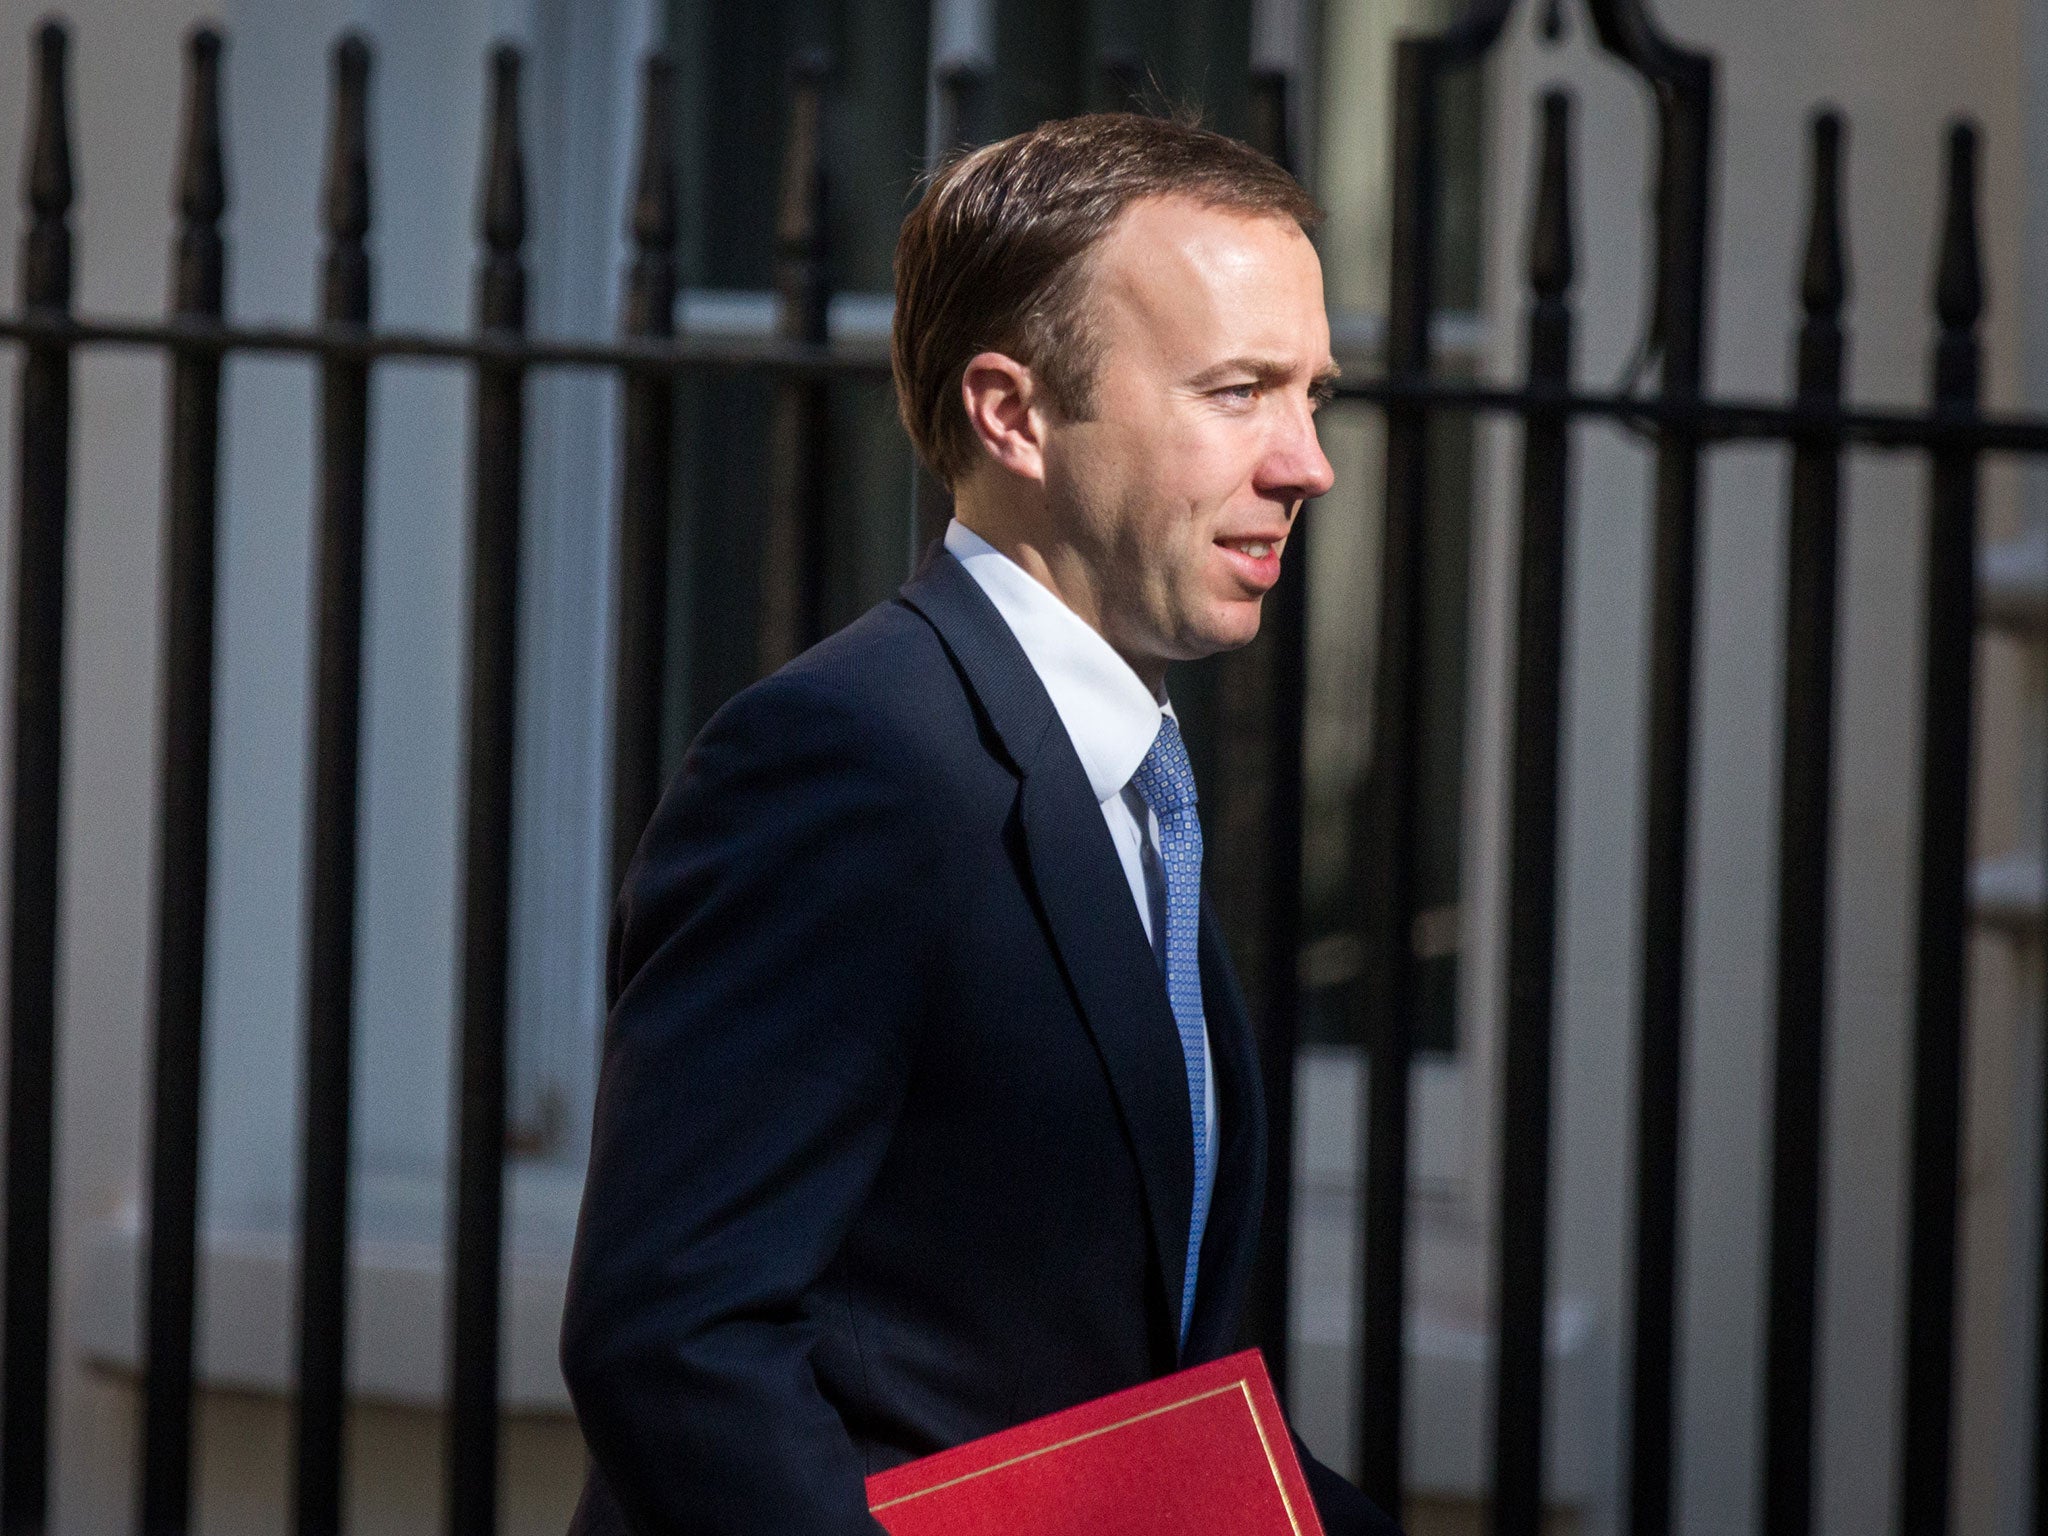 Announcing the plan, Matthew Hancock said he was 'determined' to end a 'welfare culture' that had become embedded in some of Britain’s most vulnerable communities